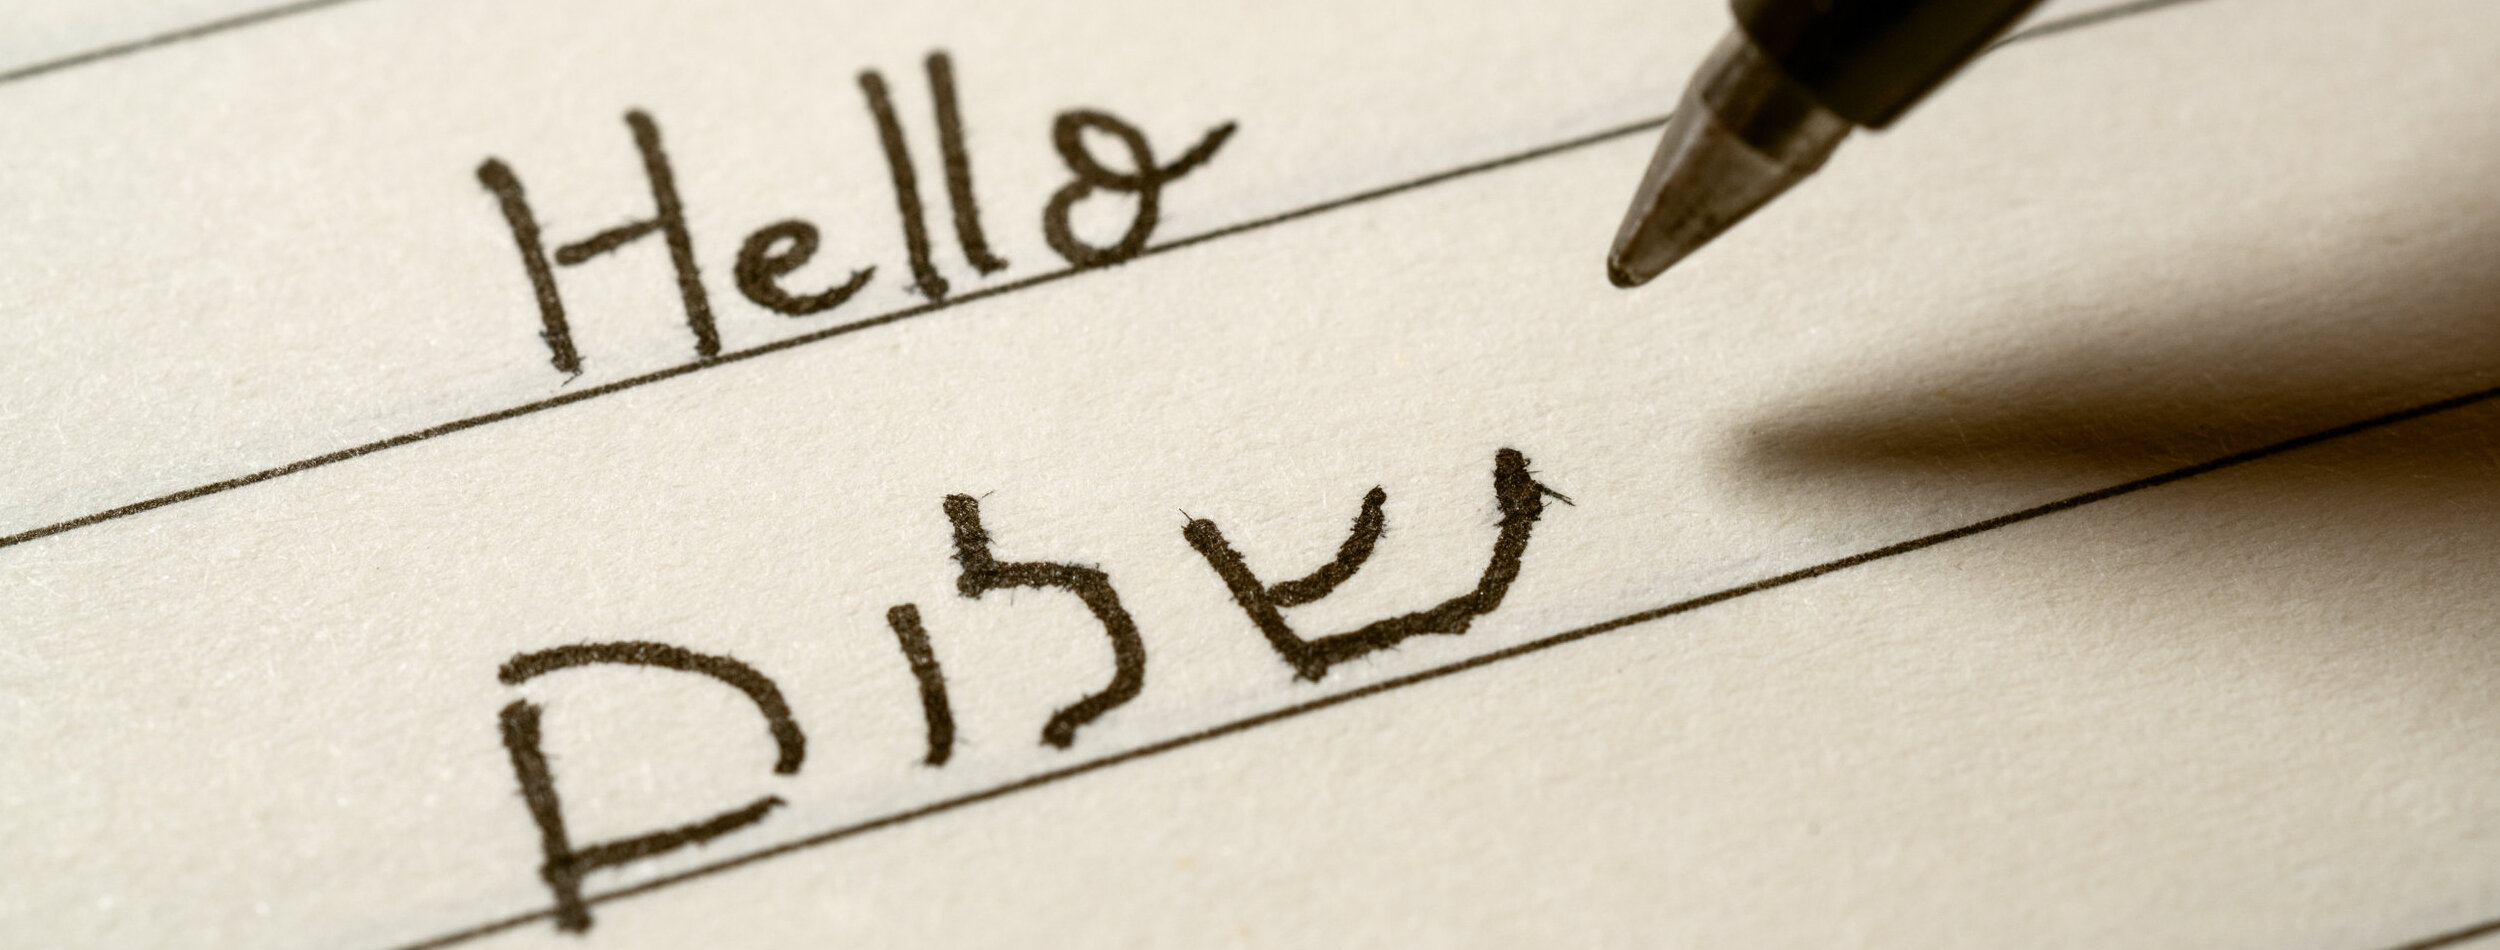 Beginner Hebrew language learner writing Hello shalom word in Hebrew alphabet on a notebook close-up shot